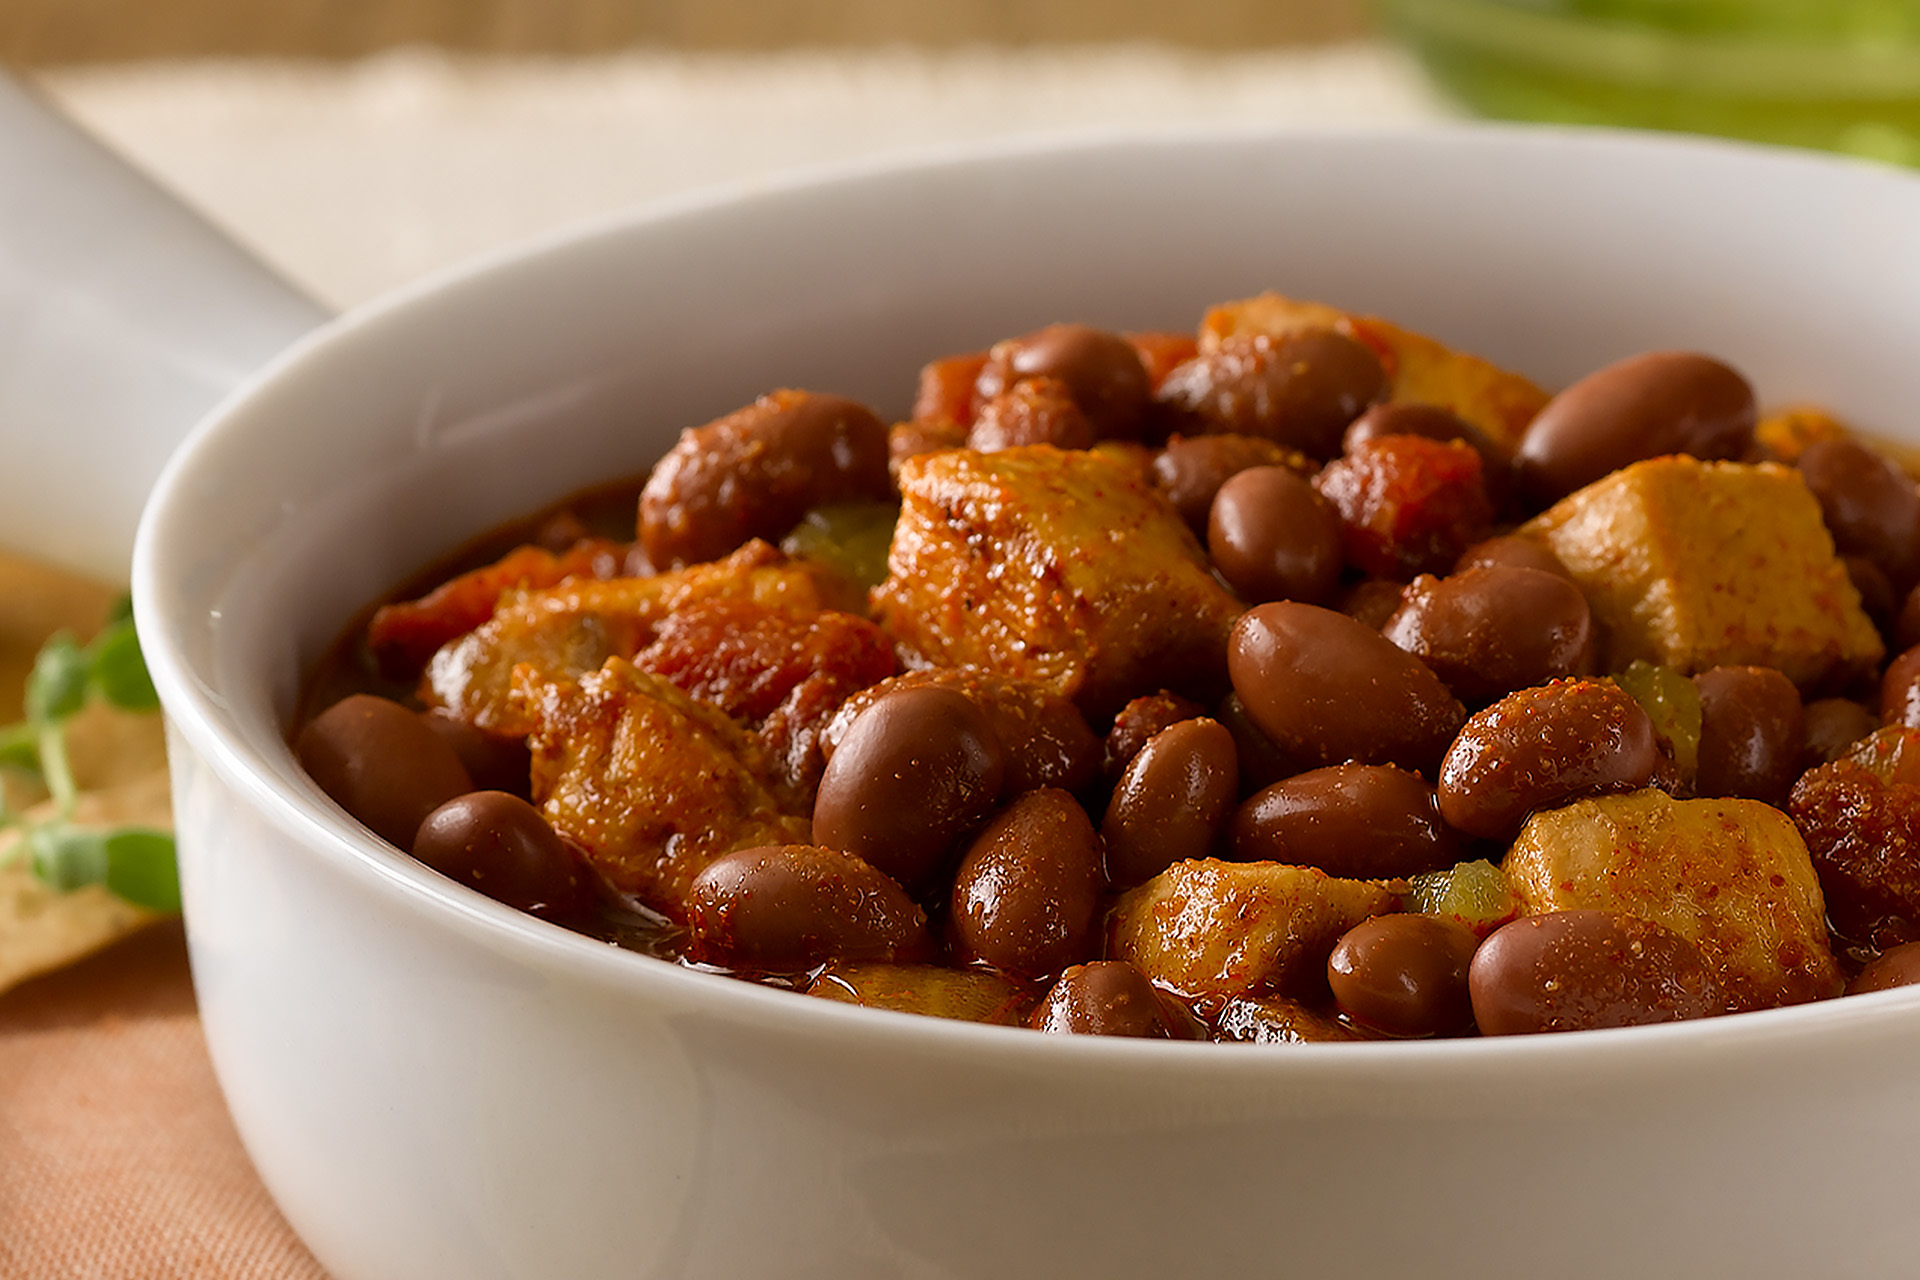 Spicy stovetop chicken and beans with tomatos in a white bowl